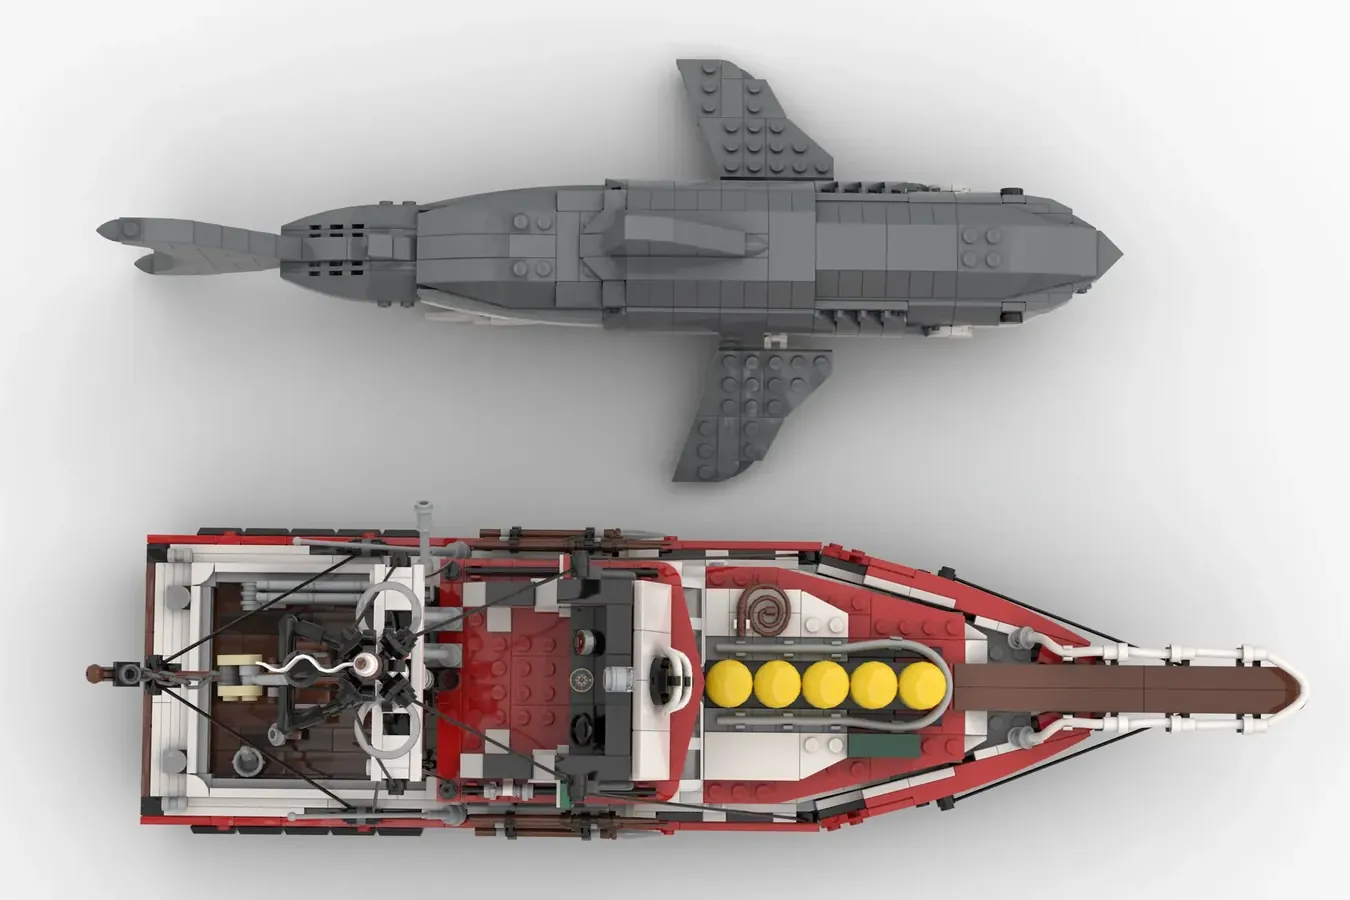 Jaws commercialized with Lego (R) ideas 2022 3rd 10,000 support design introduction